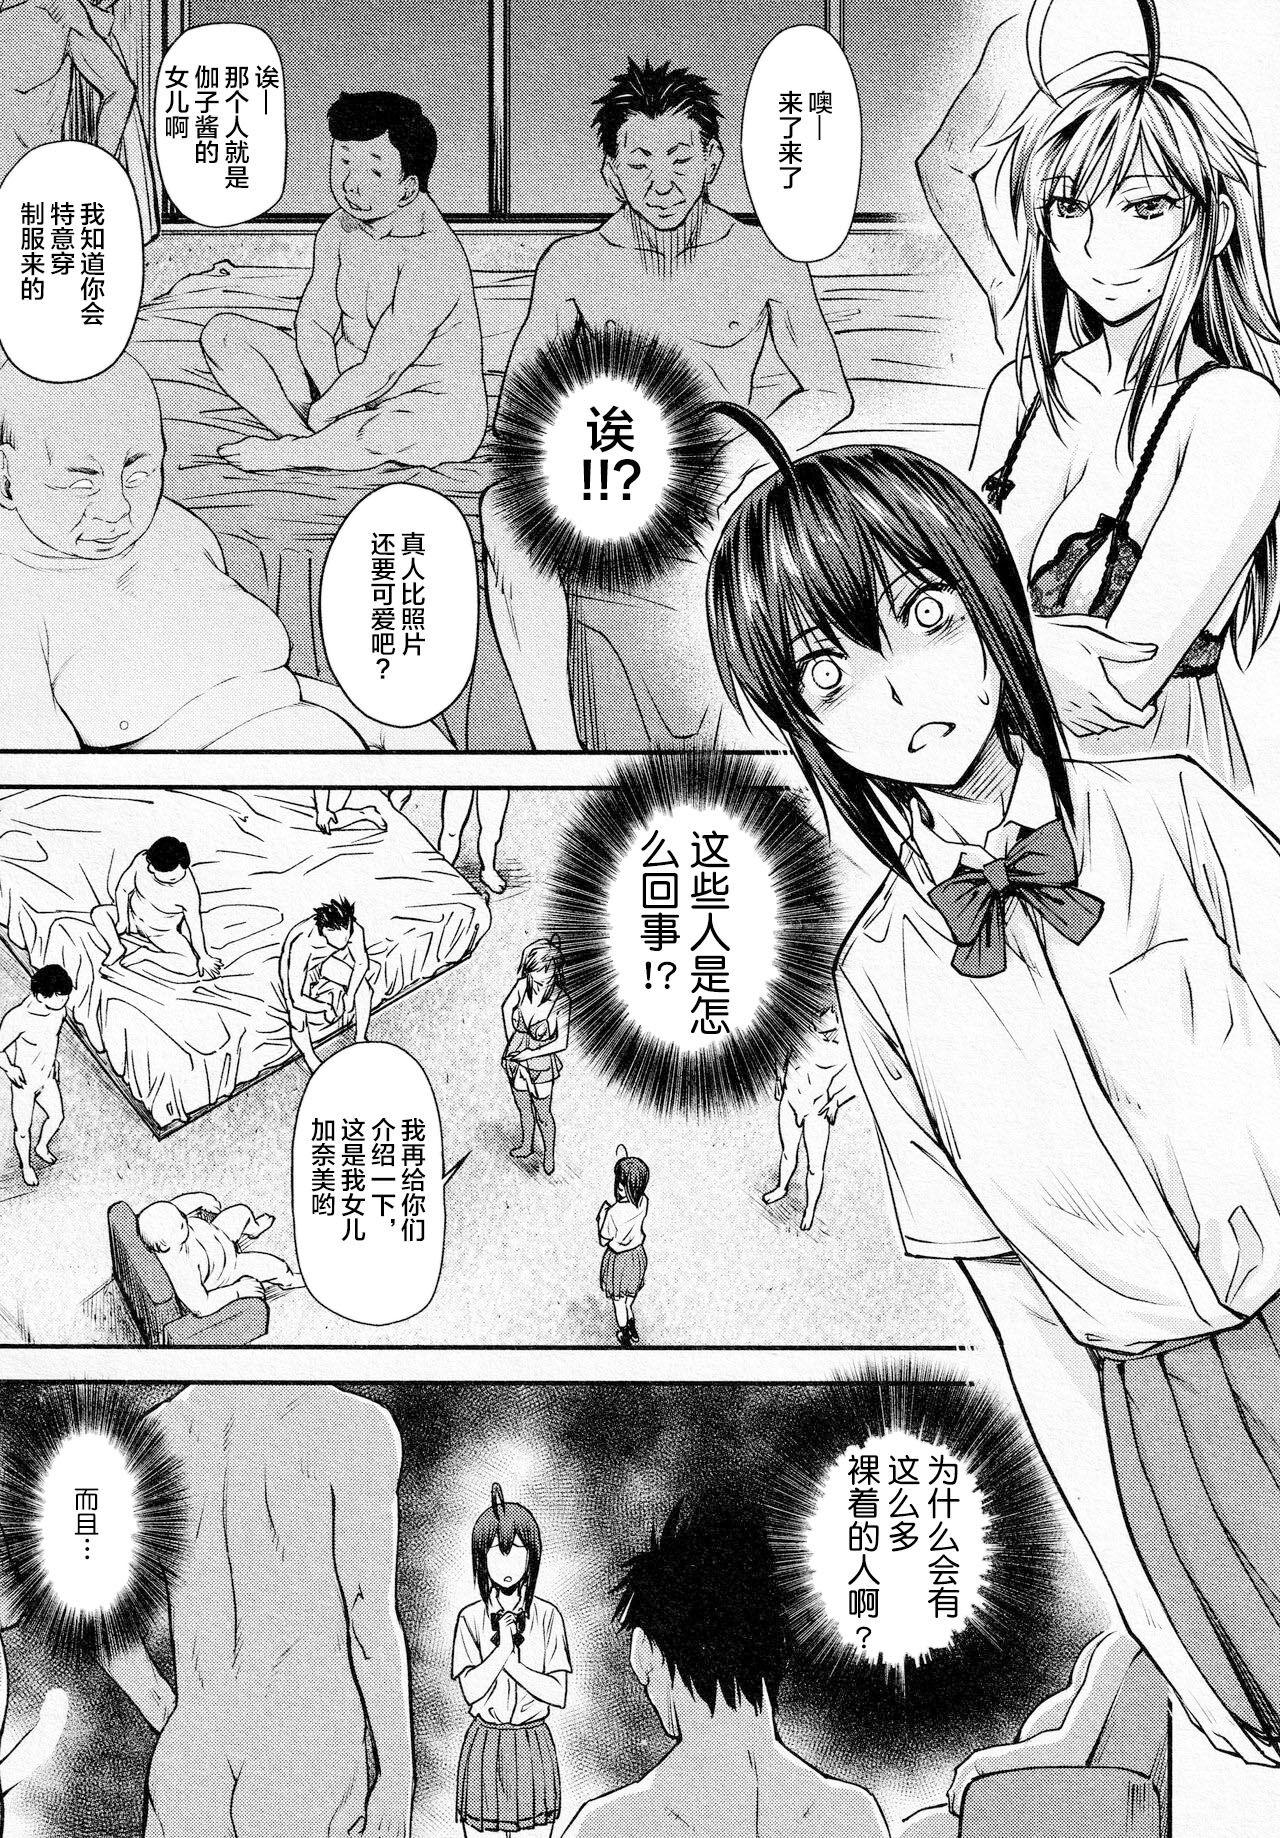  Kaname Date #14 Belly - Page 6